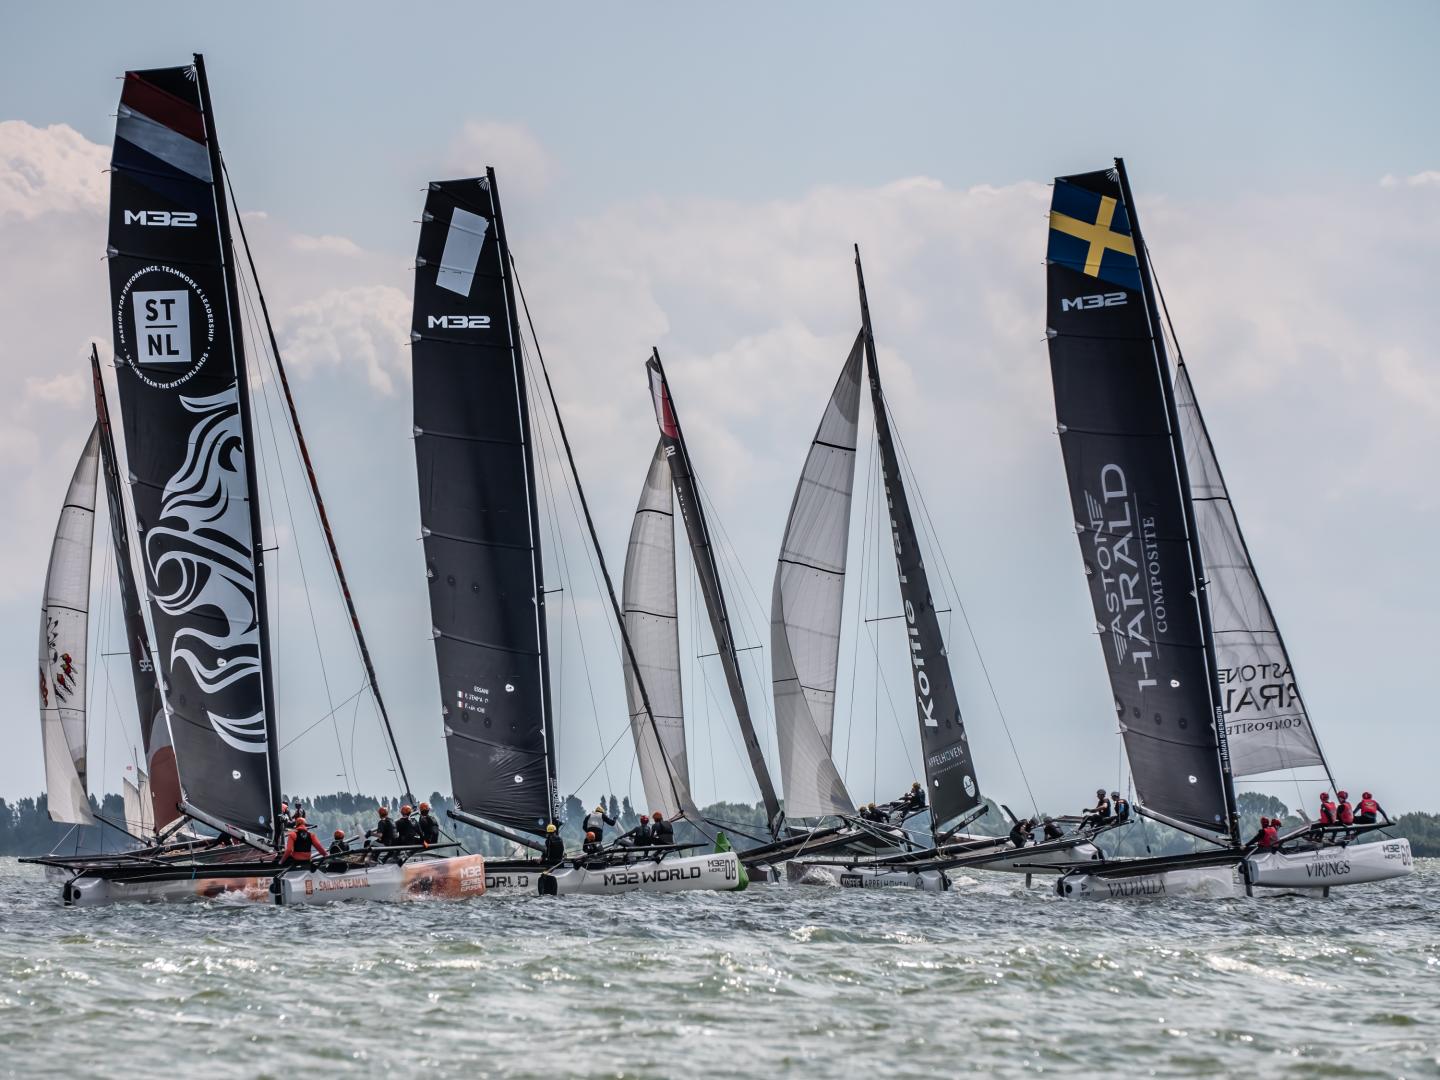 Section 16 and Cape Crow Vikings on a charge at M32 European Series